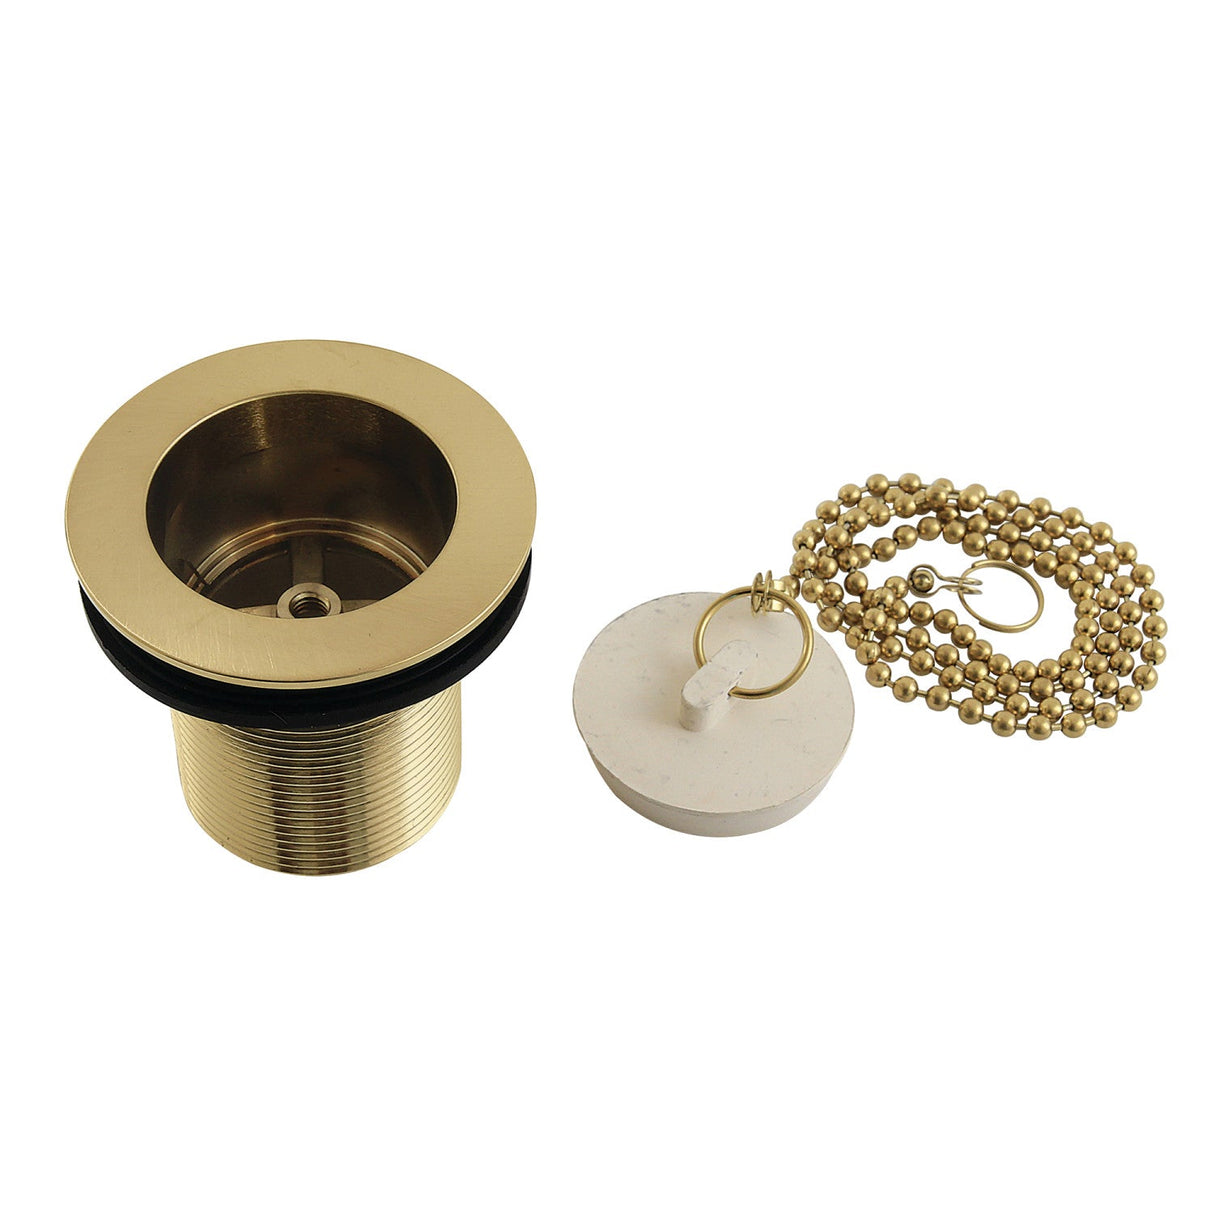 Made To Match DSP20SB 1-1/2-Inch Chain and Stopper Tub Drain with 2-Inch Body Thread, Brushed Brass